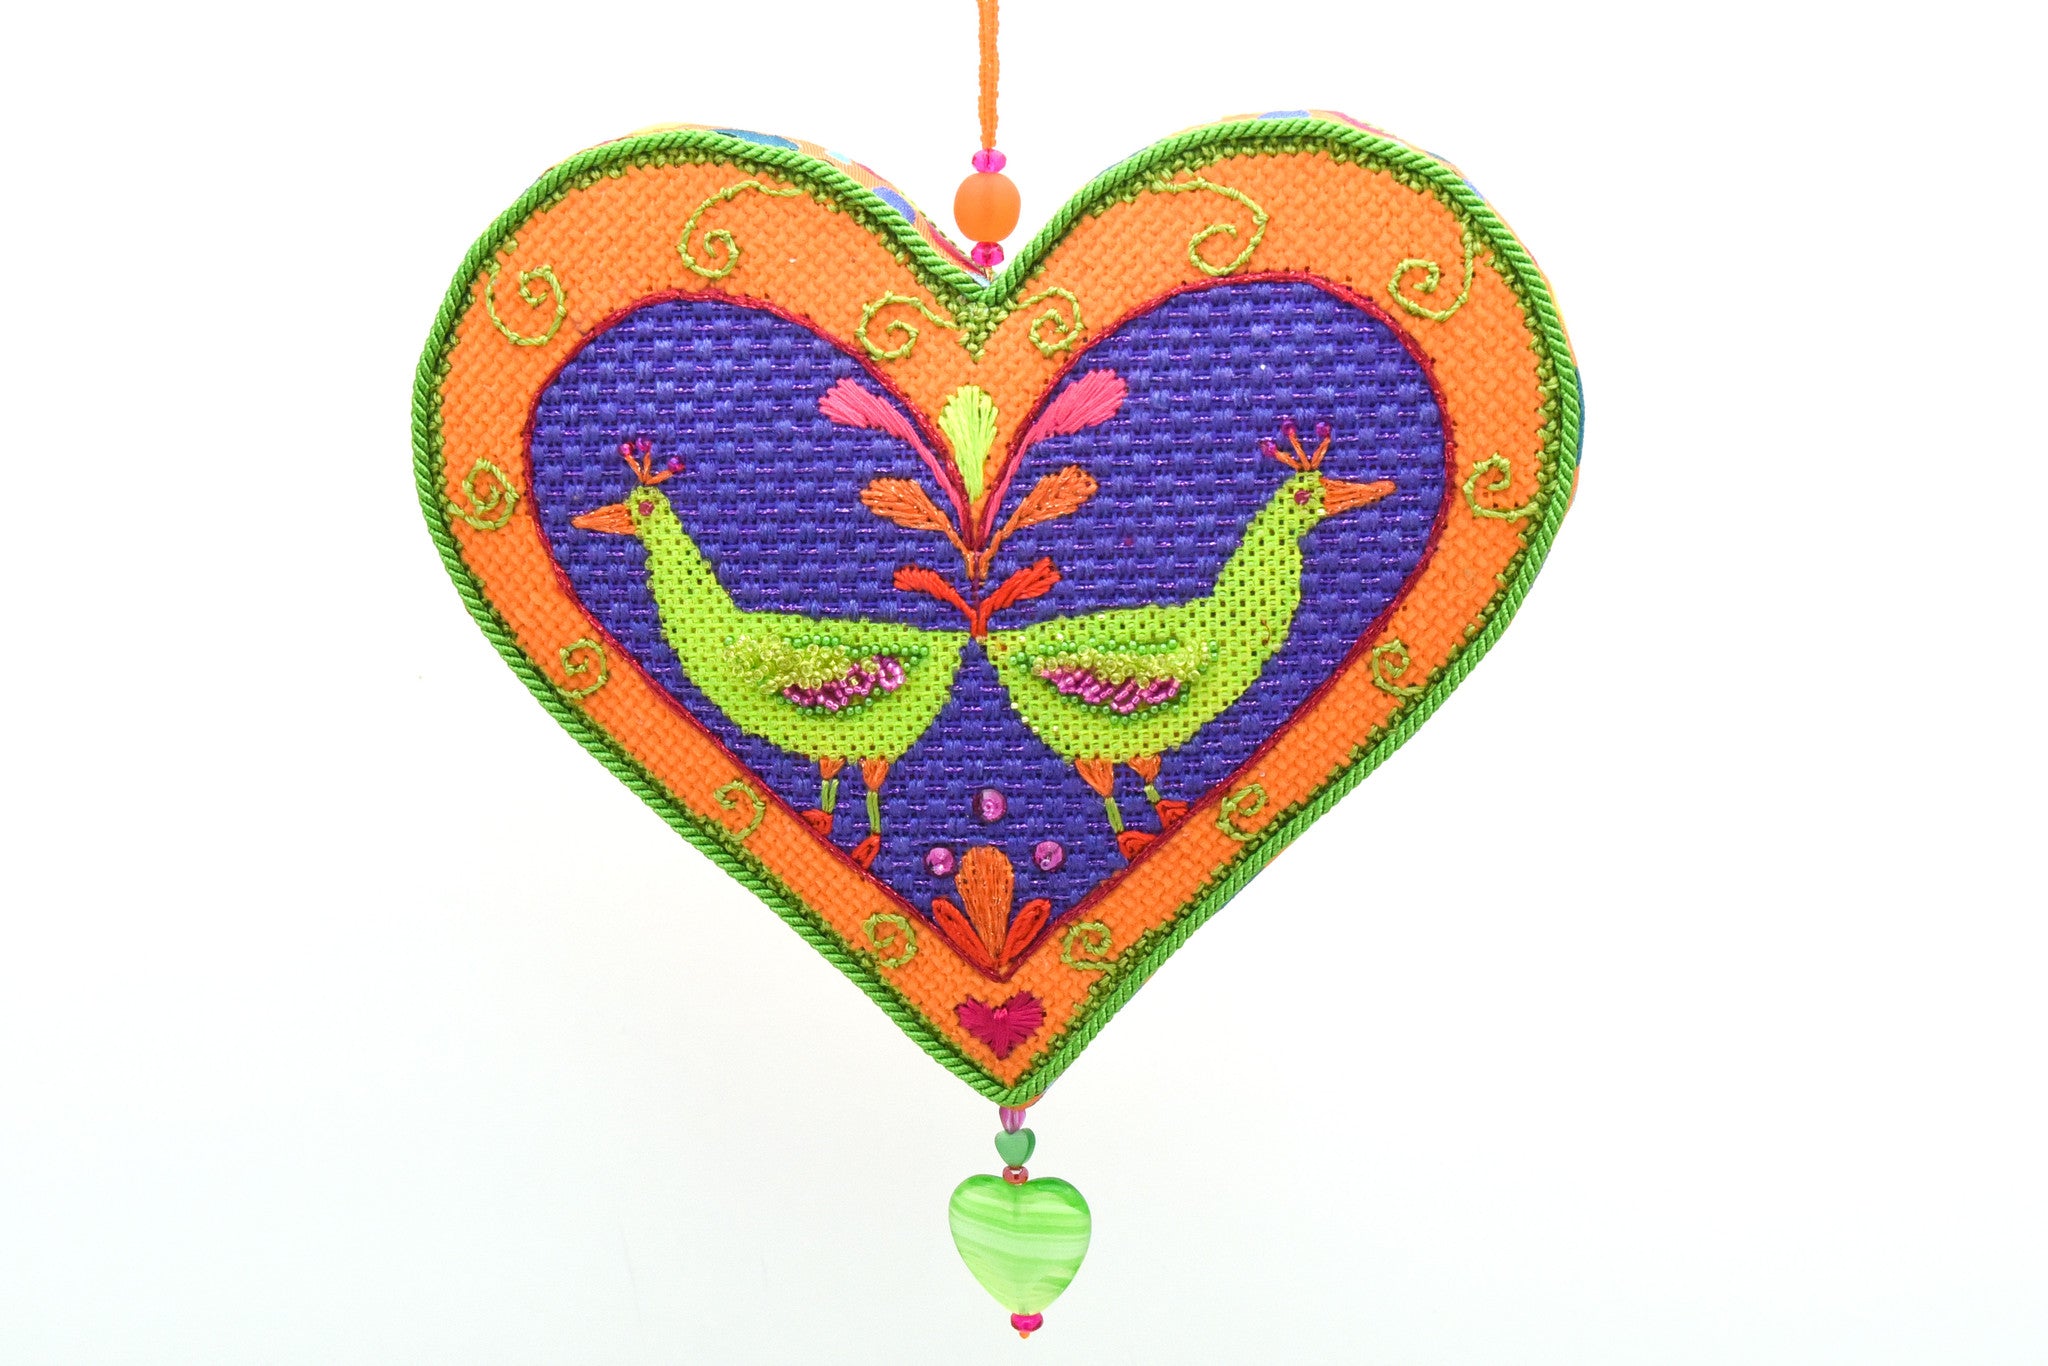 Needlepoint Ornament finished with ribbon by Zecca